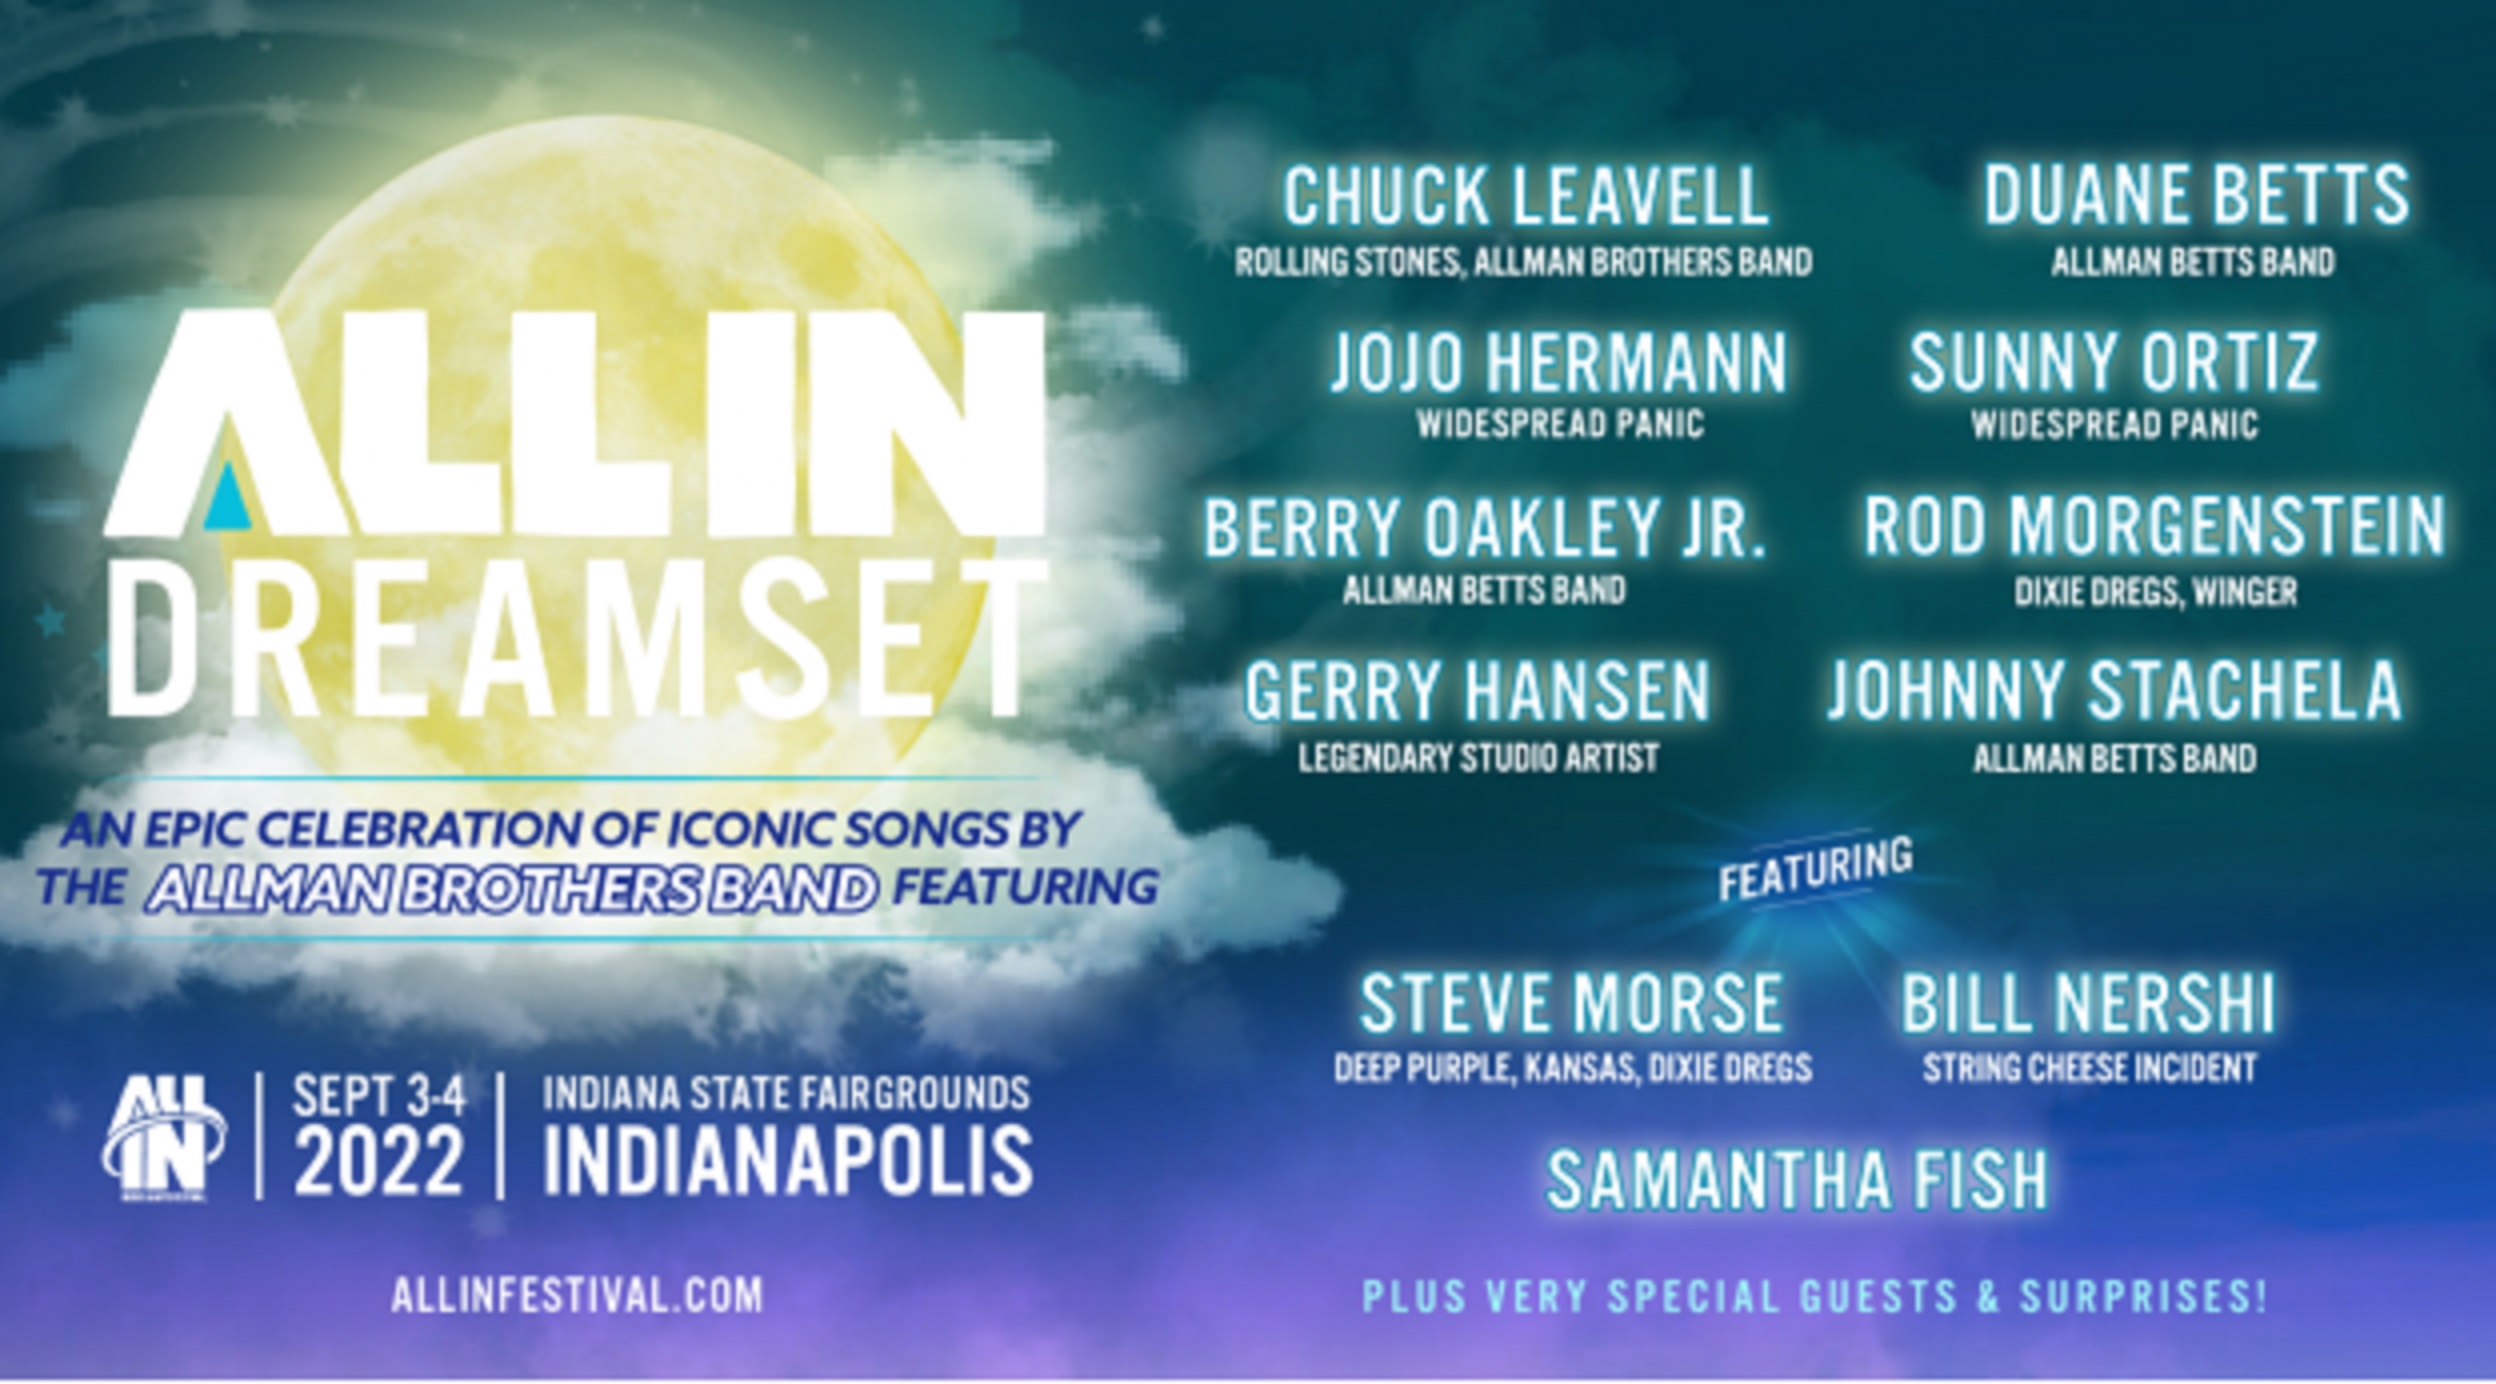 All IN Music Festival announces details for all-star lineup for Allman Brothers Band Dreamset